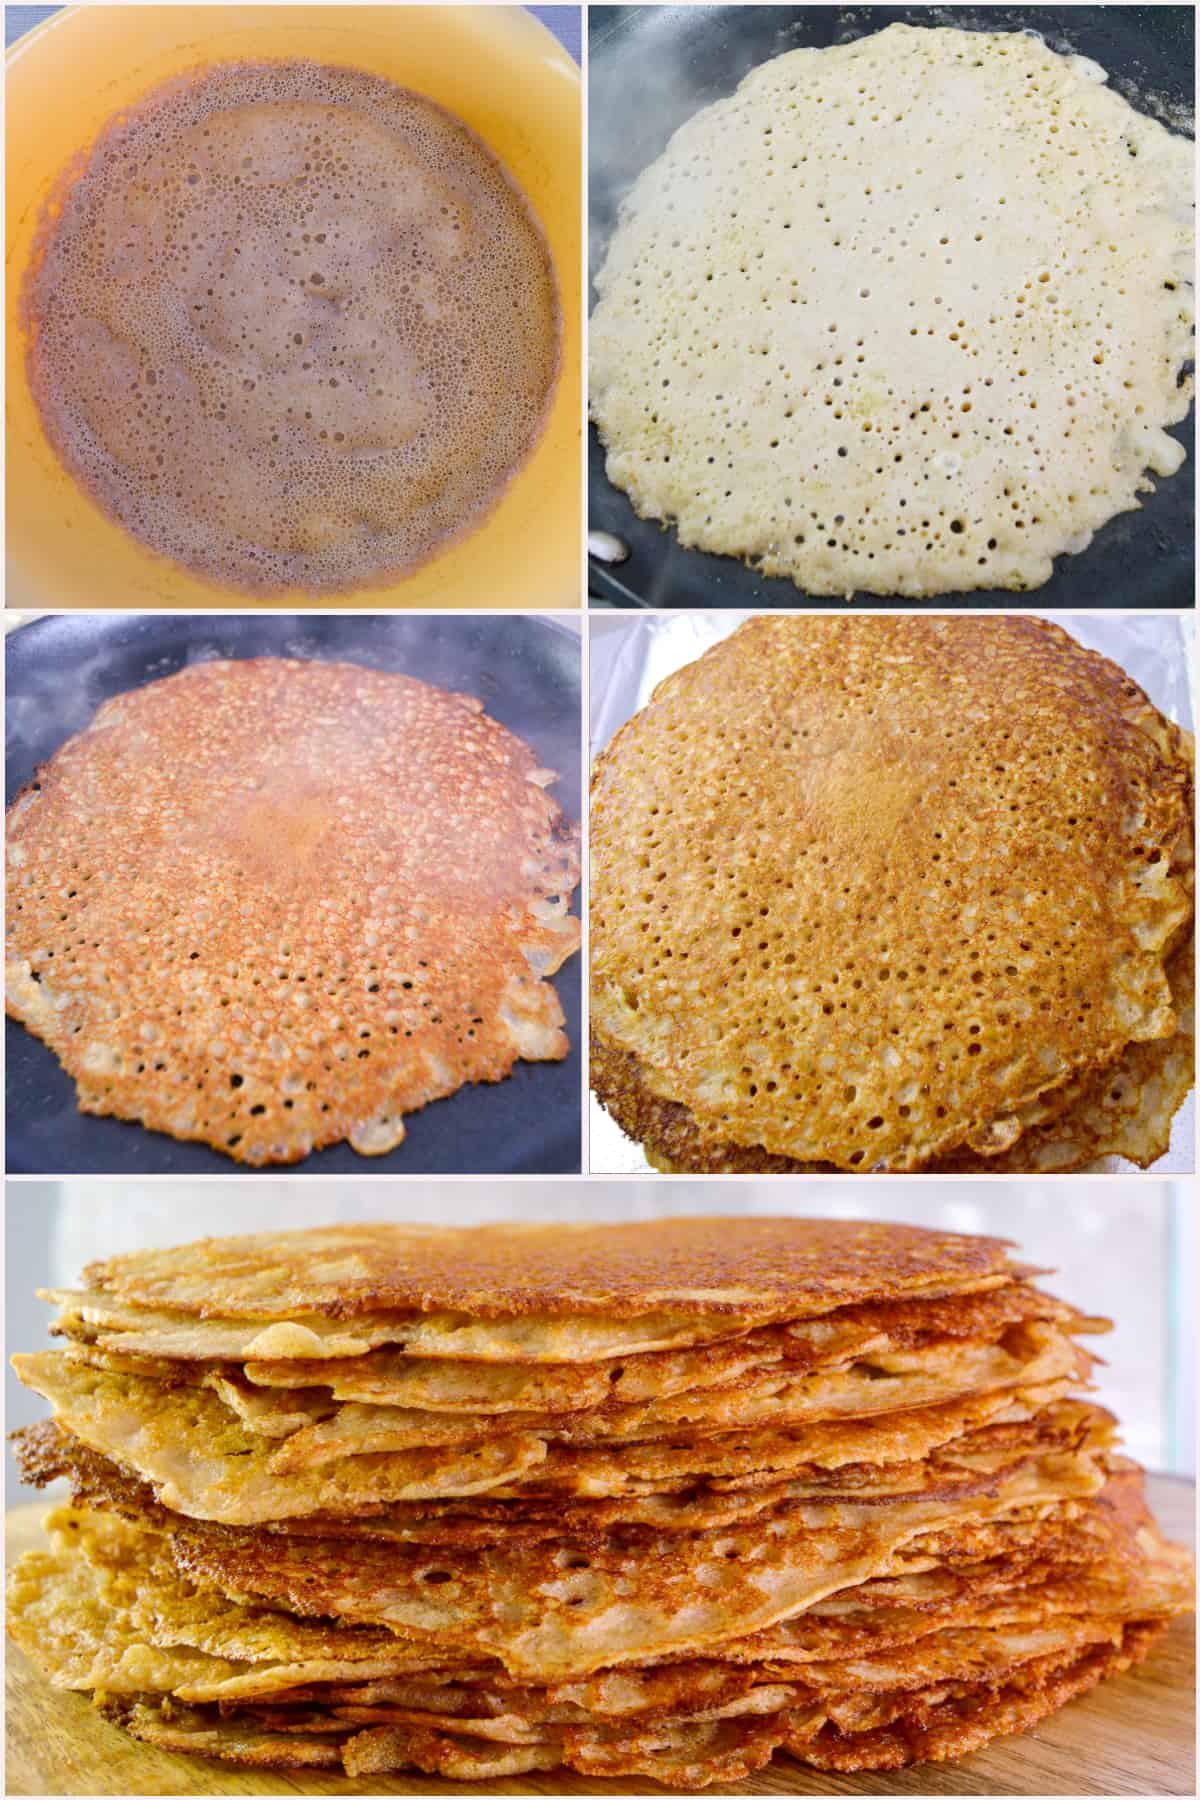 Collage showing steps for making Russian blini